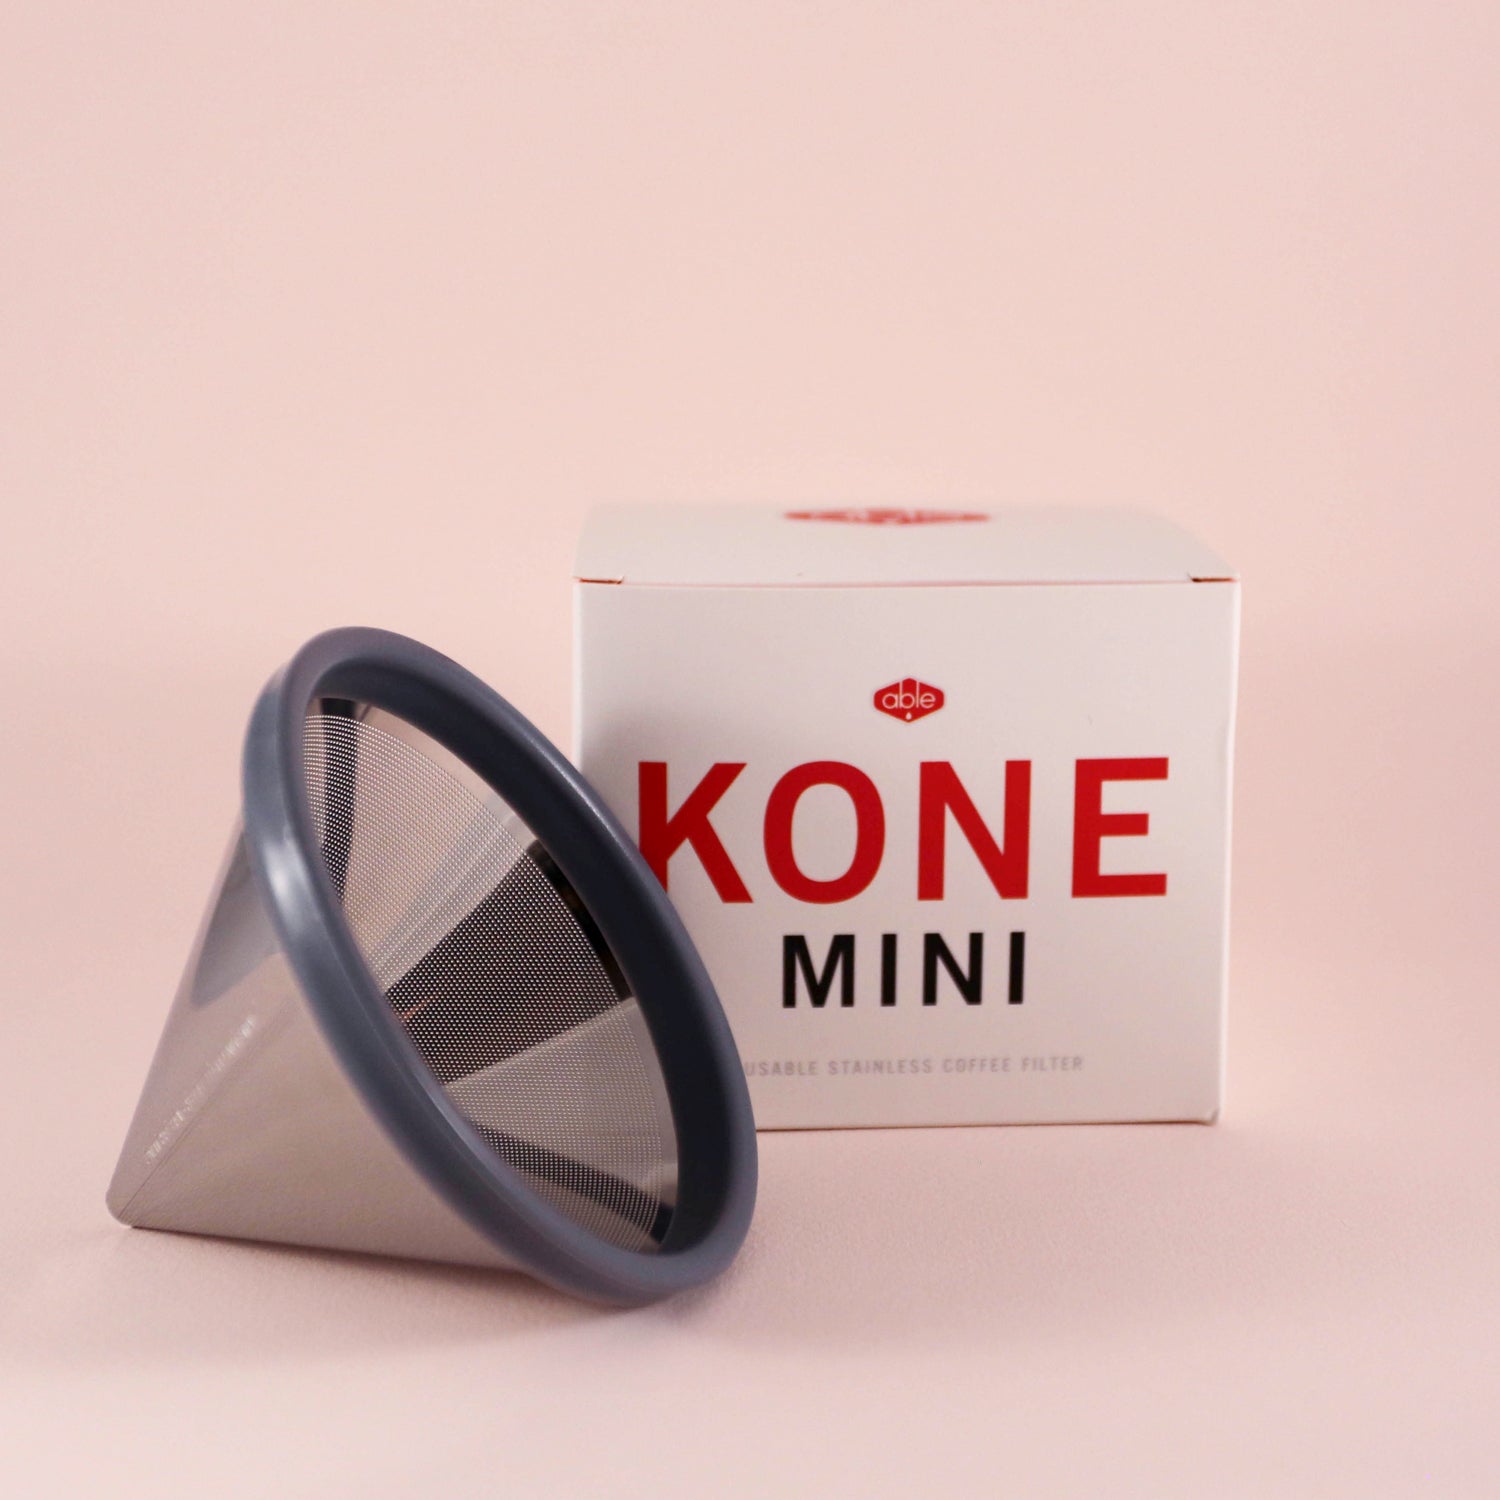 A gray, cone-shaped reusable stainless steel filter titled "Tandem Coffee Kone Mini" leaning against its packaging box on a pink background.